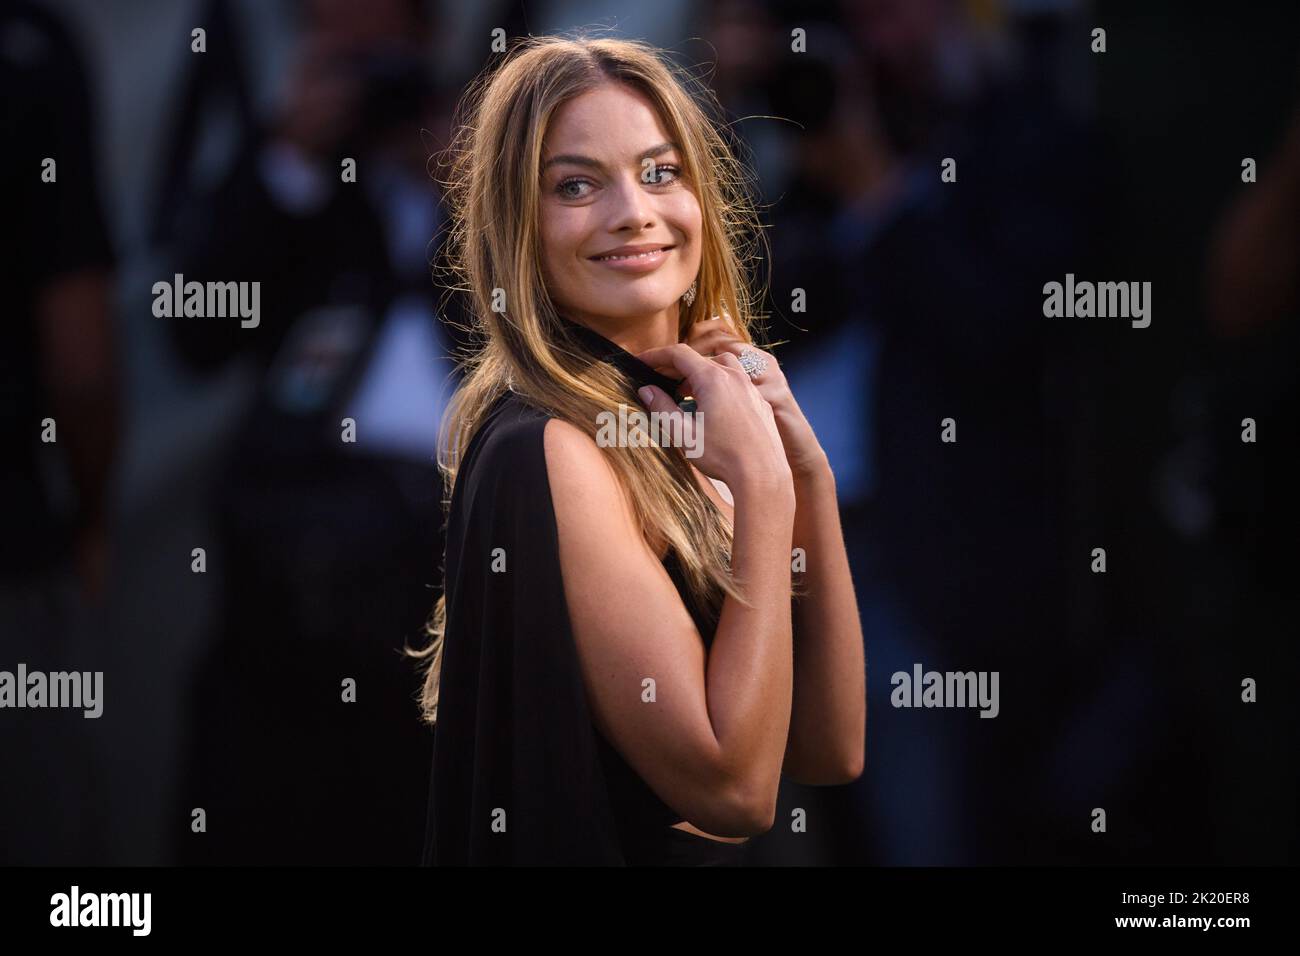 London, UK. 21 September 2022. Margot Robbie attending the European premiere of Amsterdam at the Odeon Luxe Leicester Square Cinema, London Picture date: Wednesday September 21, 2022. Photo credit should read: Matt Crossick/Empics/Alamy Live News Stock Photo